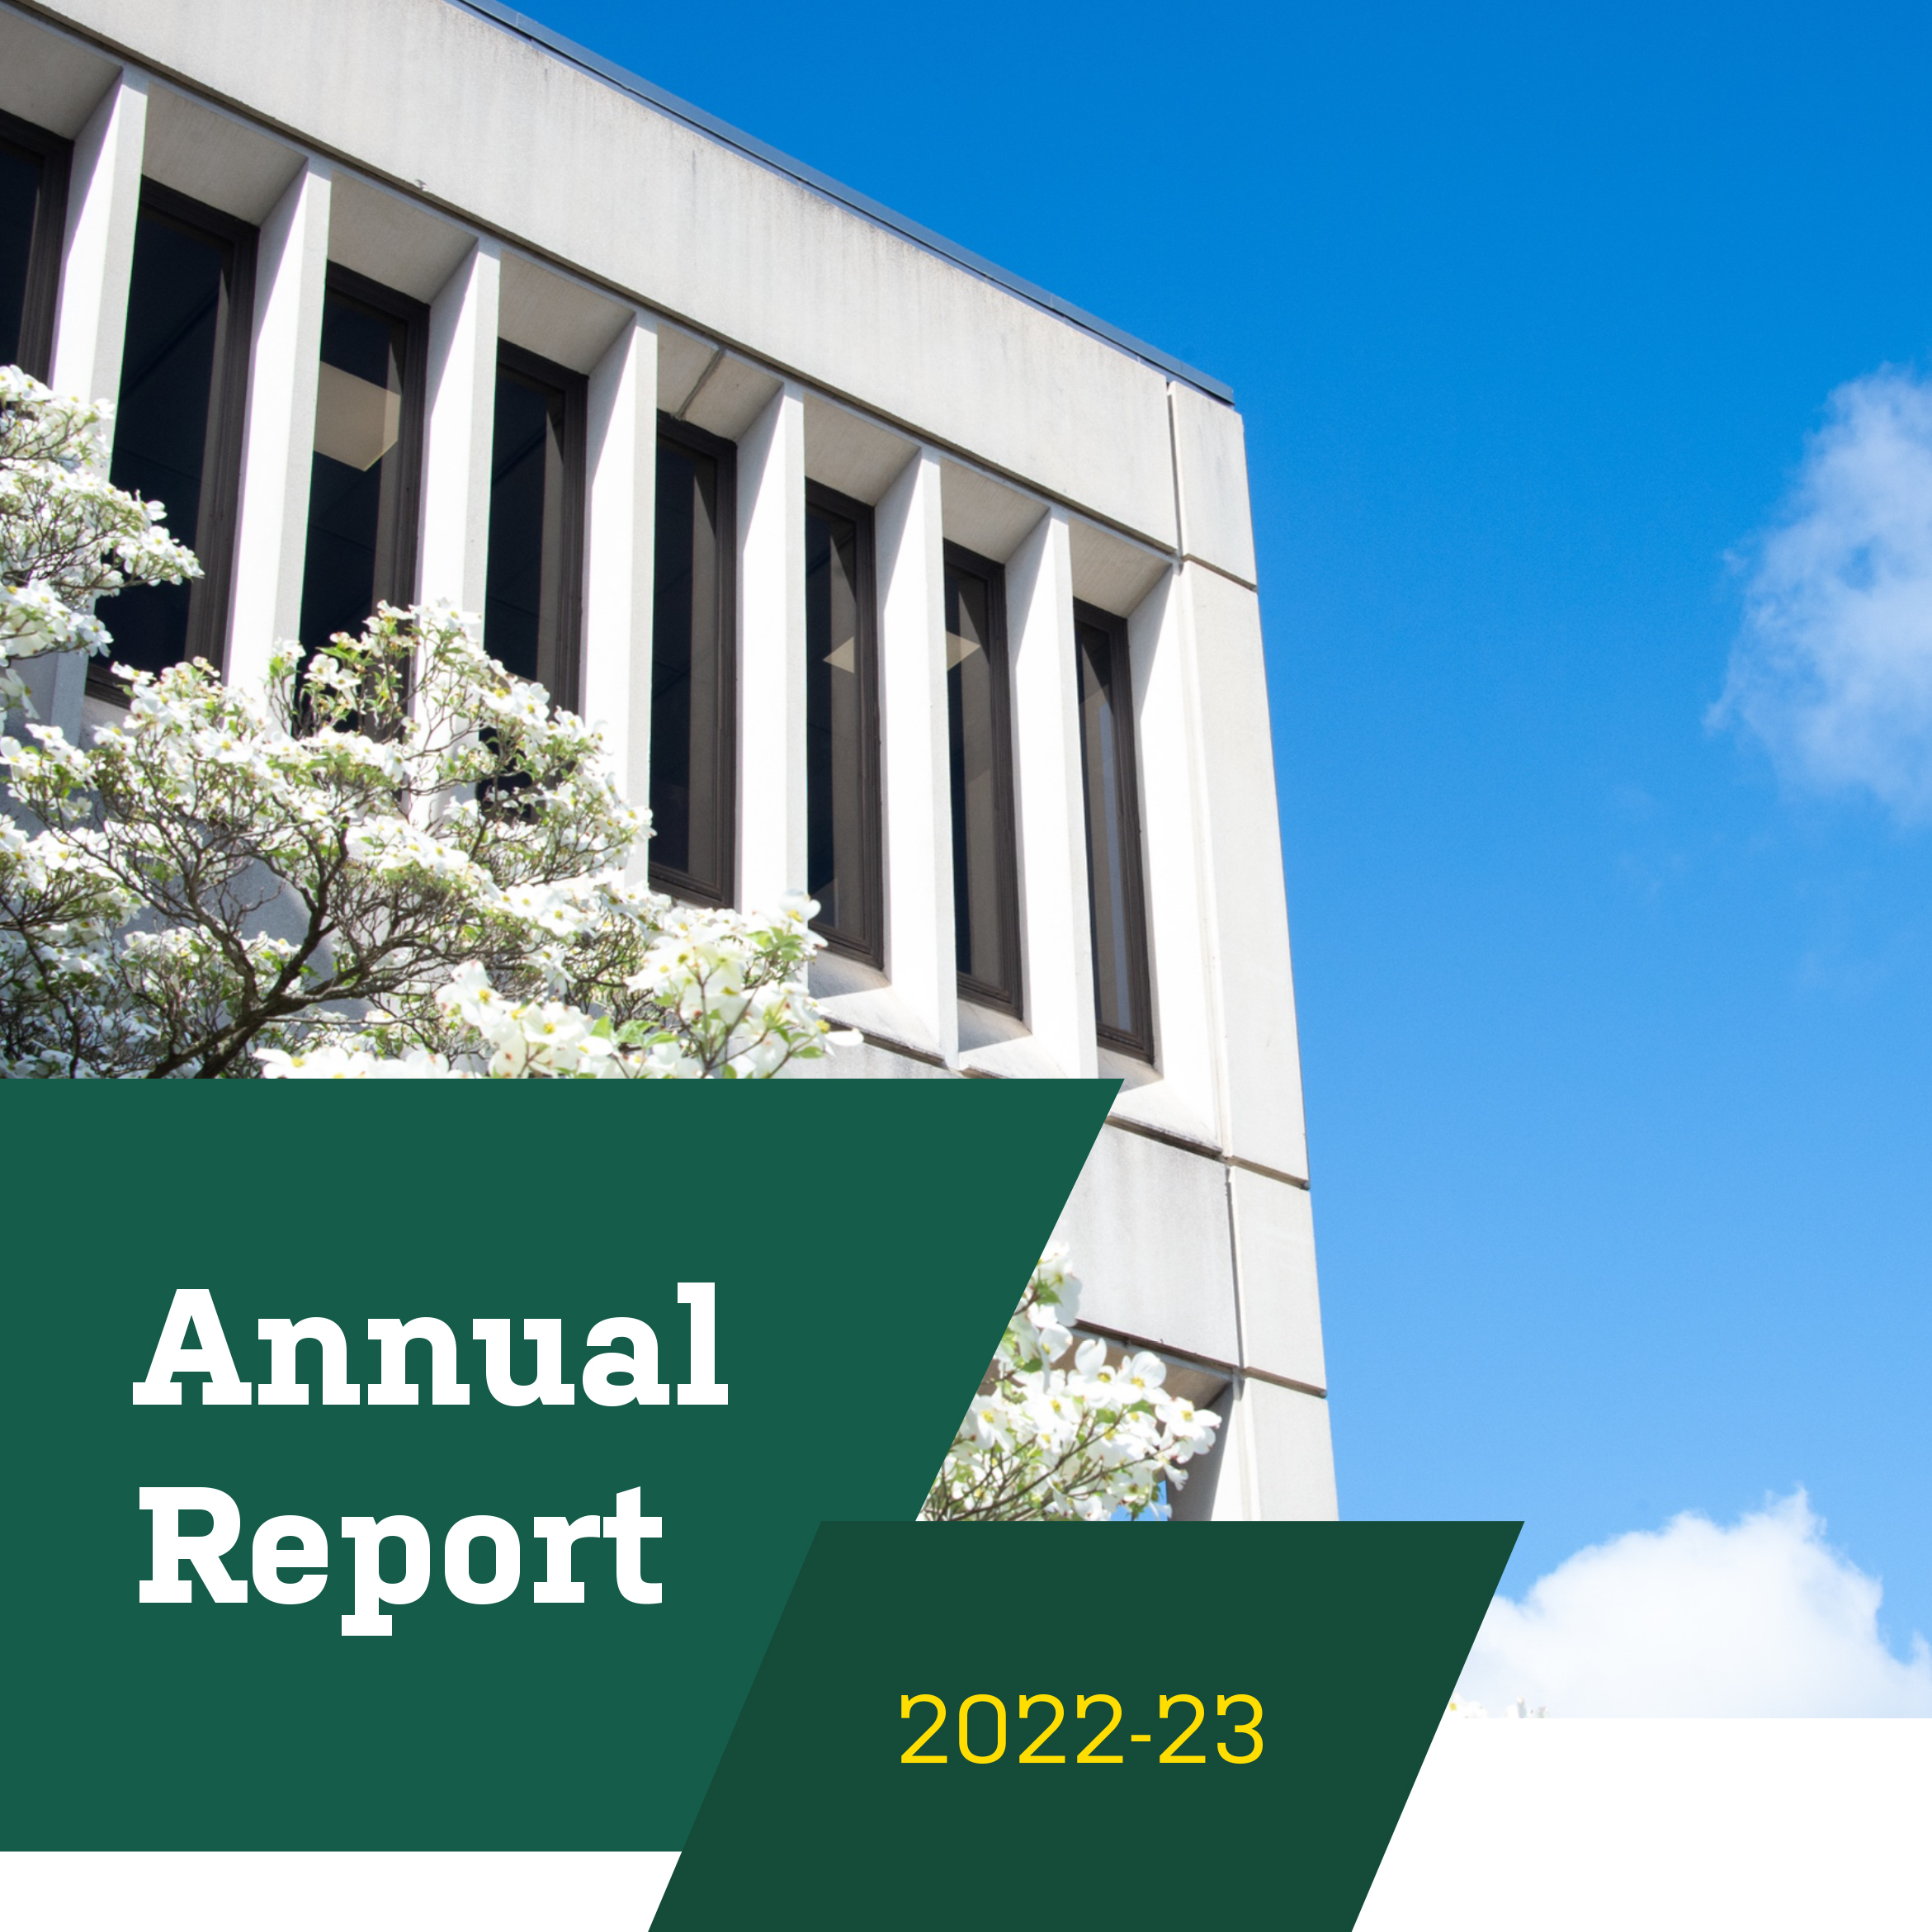 UAB Libraries 2022-23 Annual Report now available online